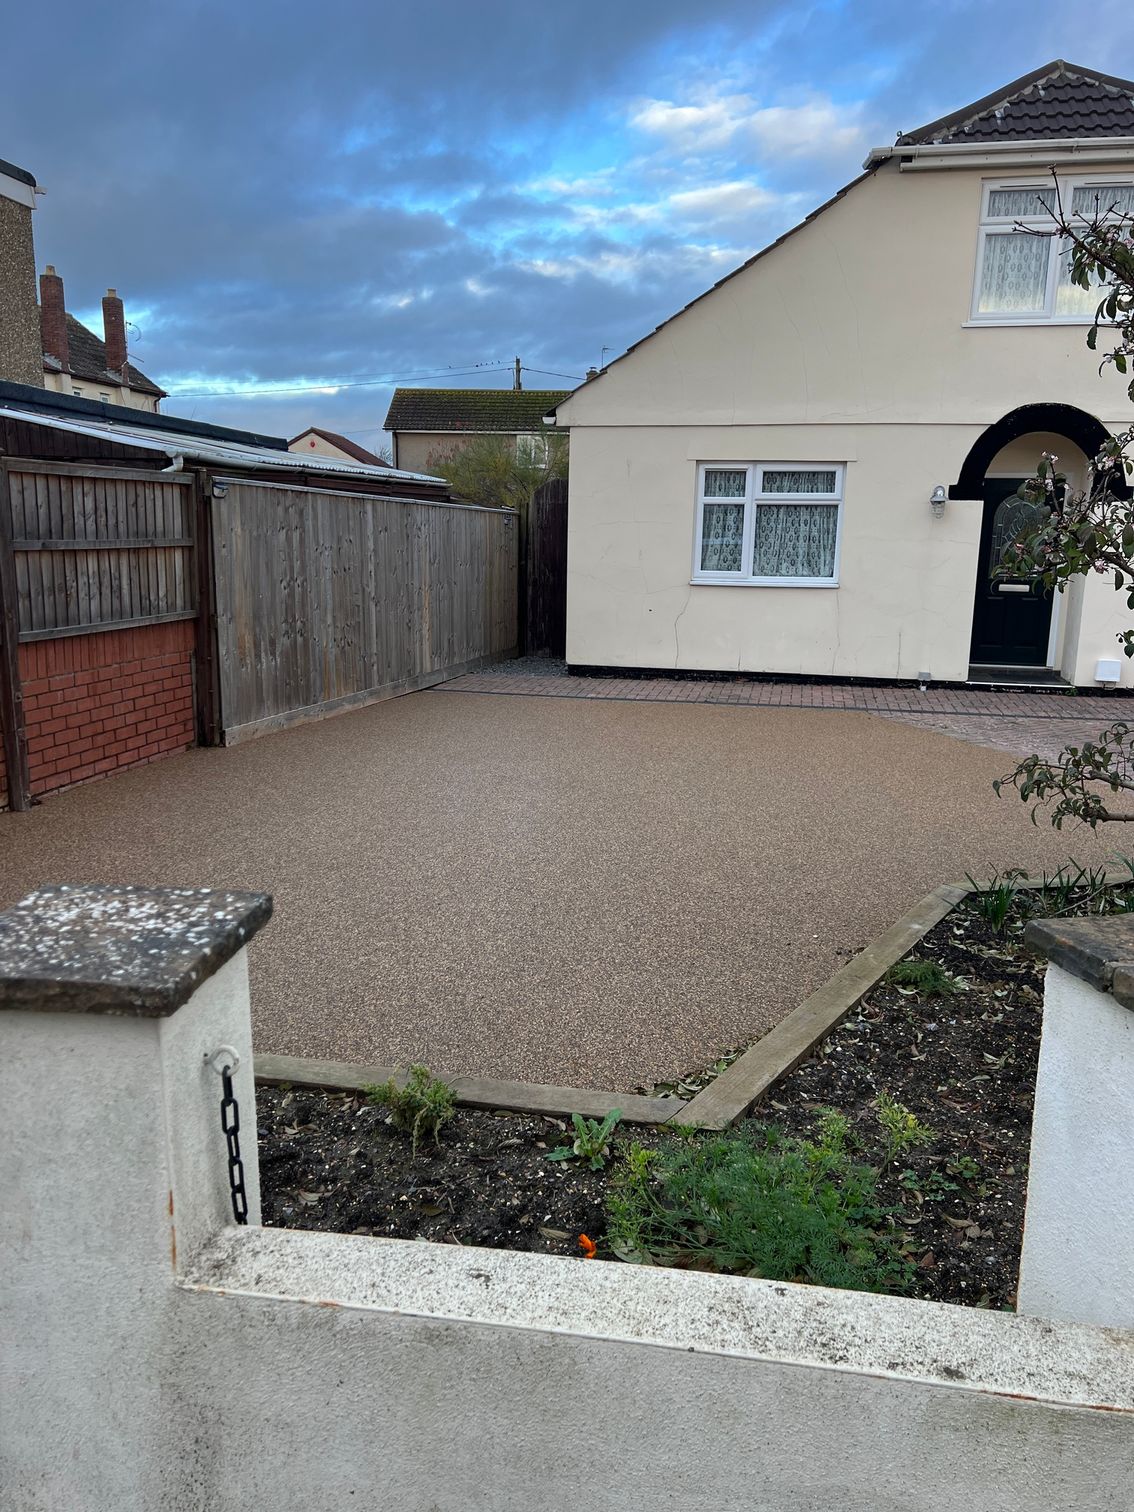 Beige resin driveway outside a cream two-story home.